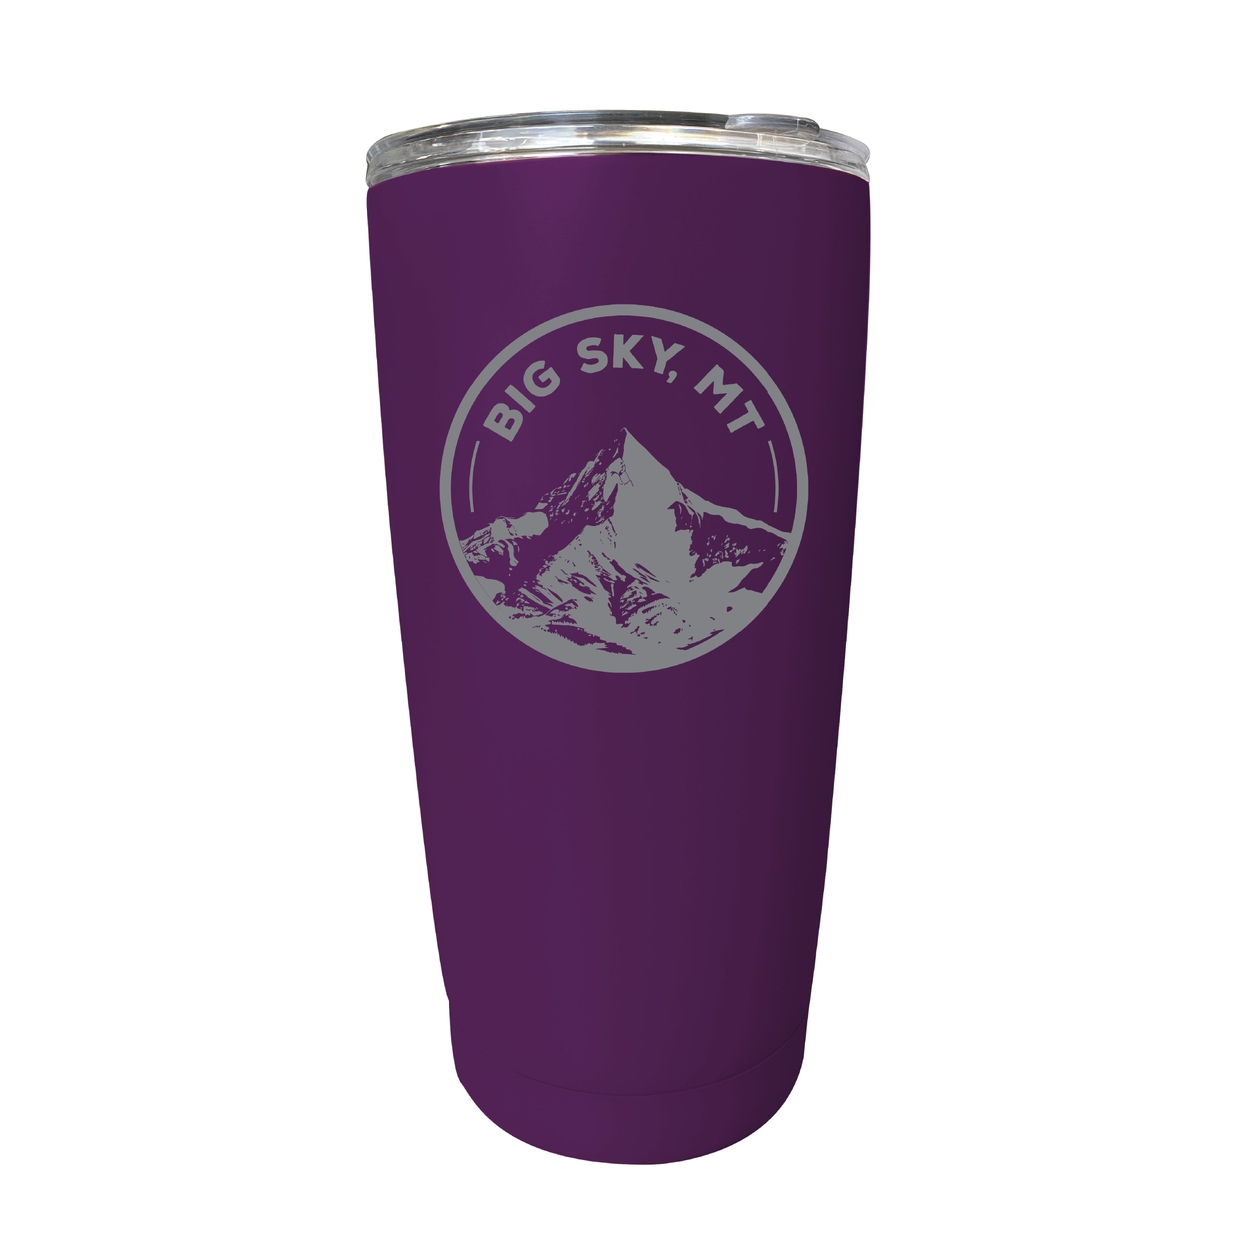 Big Sky Montana Souvenir 16 Oz Engraved Stainless Steel Insulated Tumbler - Pink,,2-Pack